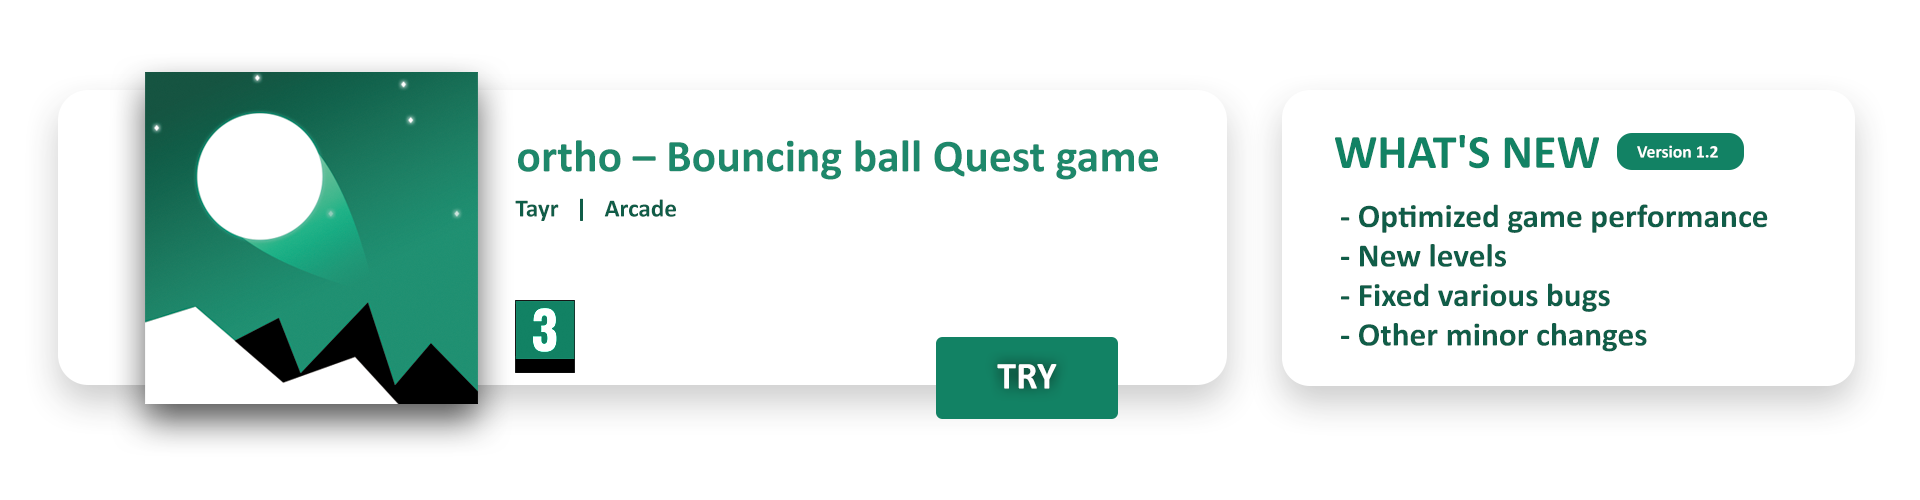 ortho – Bouncing ball Quest game